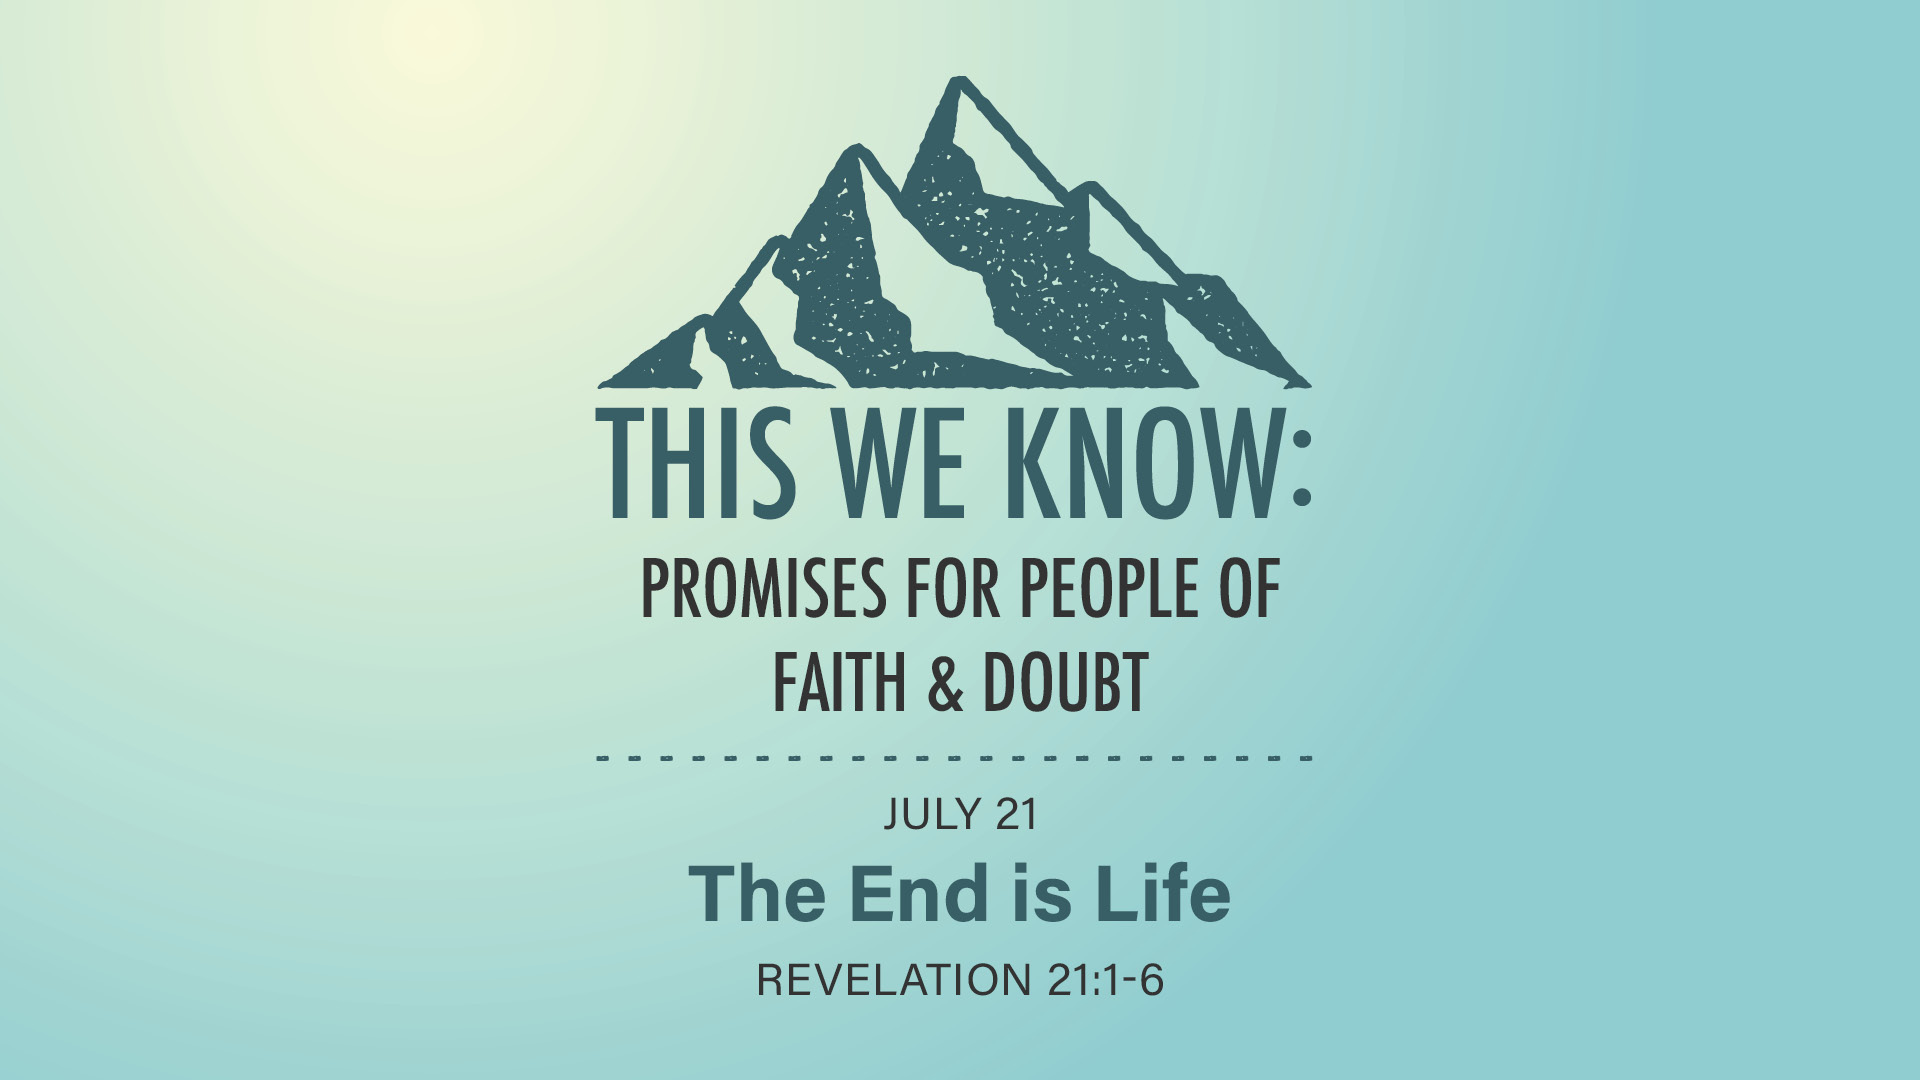 July 21 - This We Know: Promises for People of Faith & Doubt: The End is Life